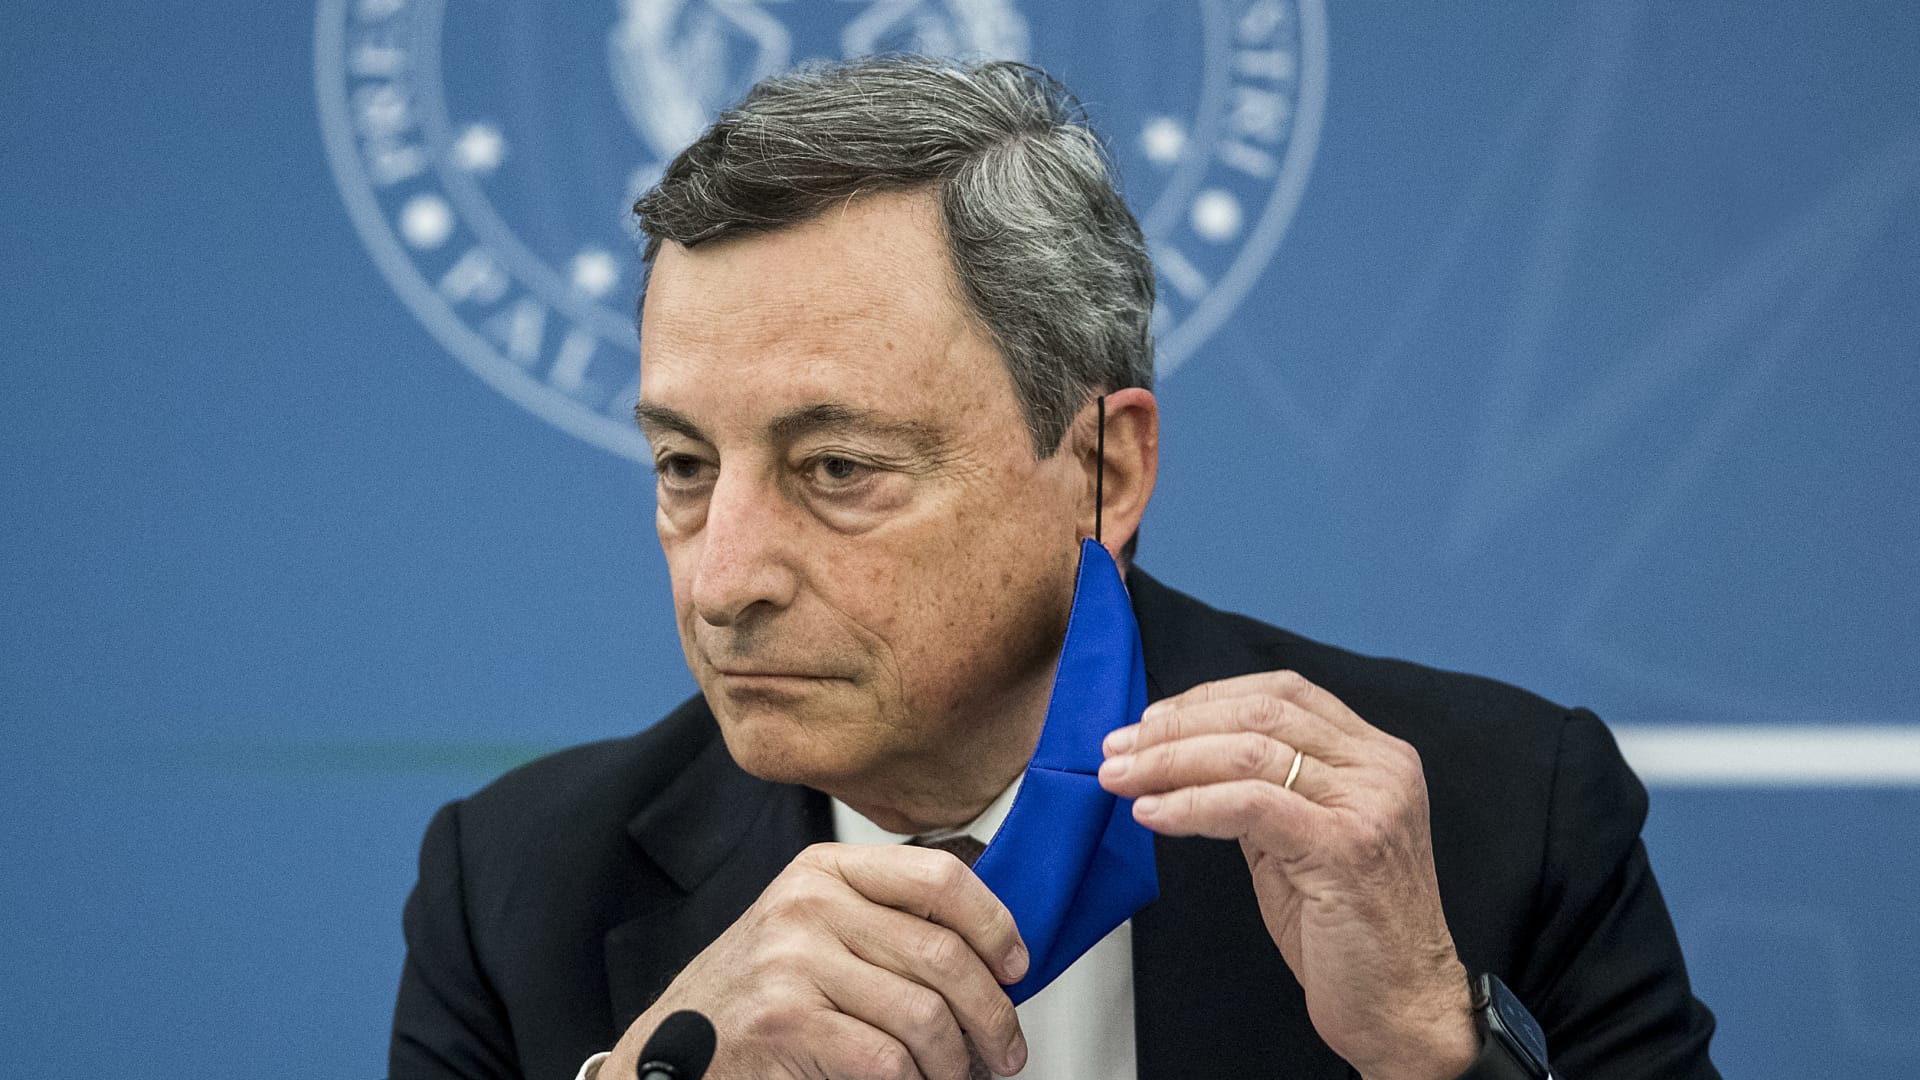 Italian Prime Minister Mario Draghi says he will resign